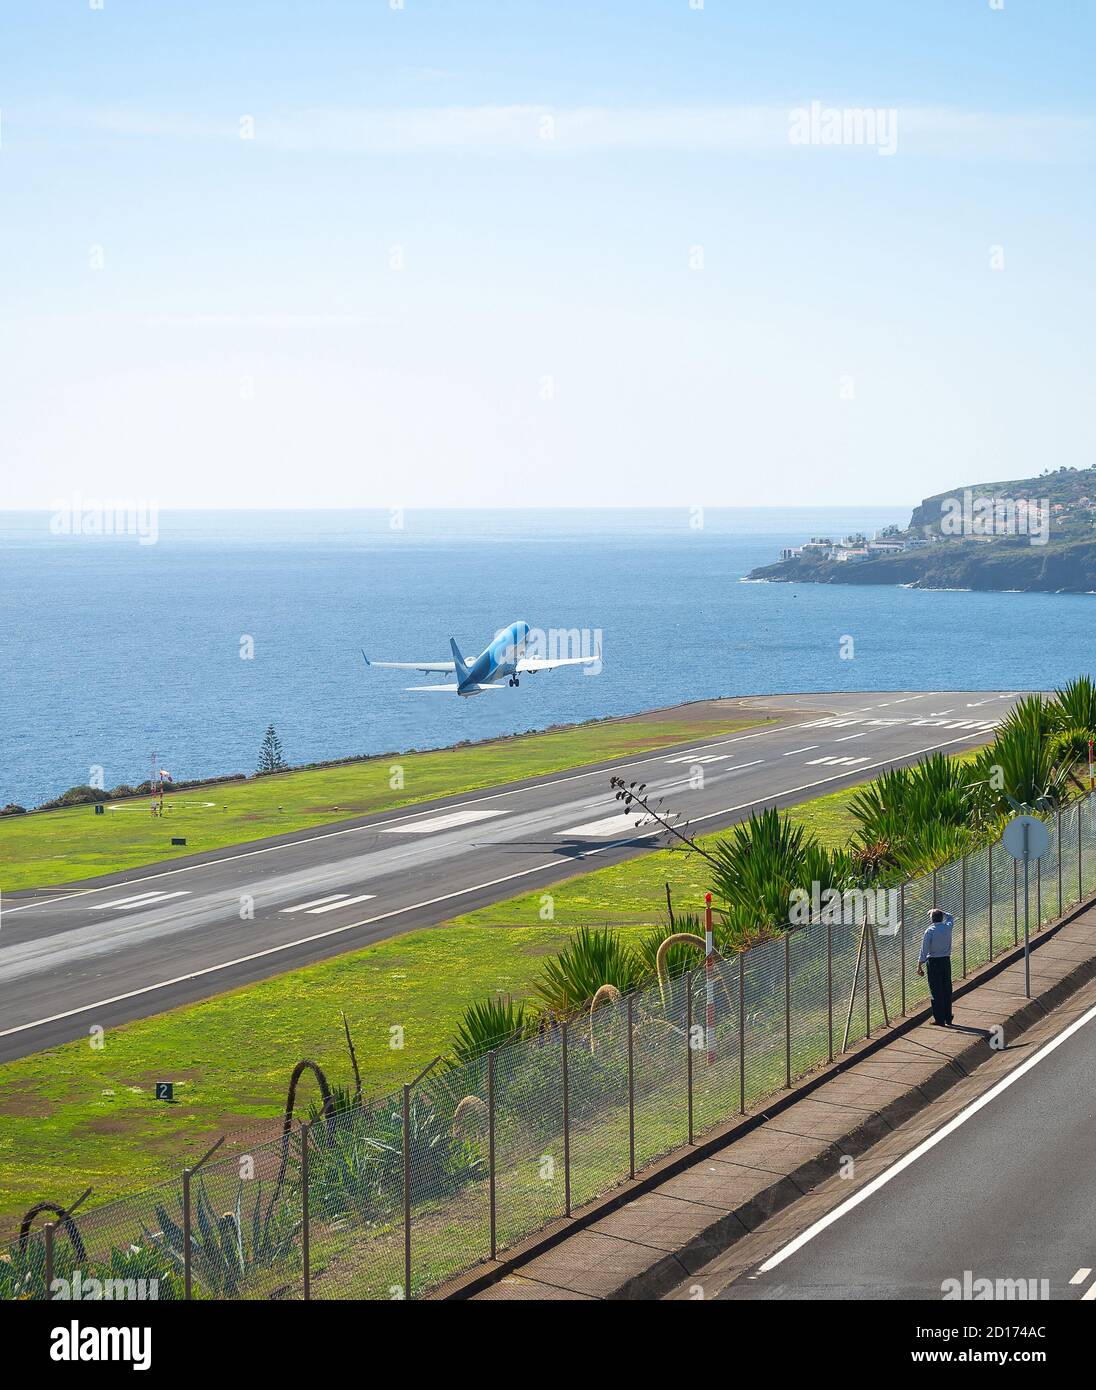 Man watching airplane taking of from runway of Funchal international airport, Madeira, Portugal Stock Photo